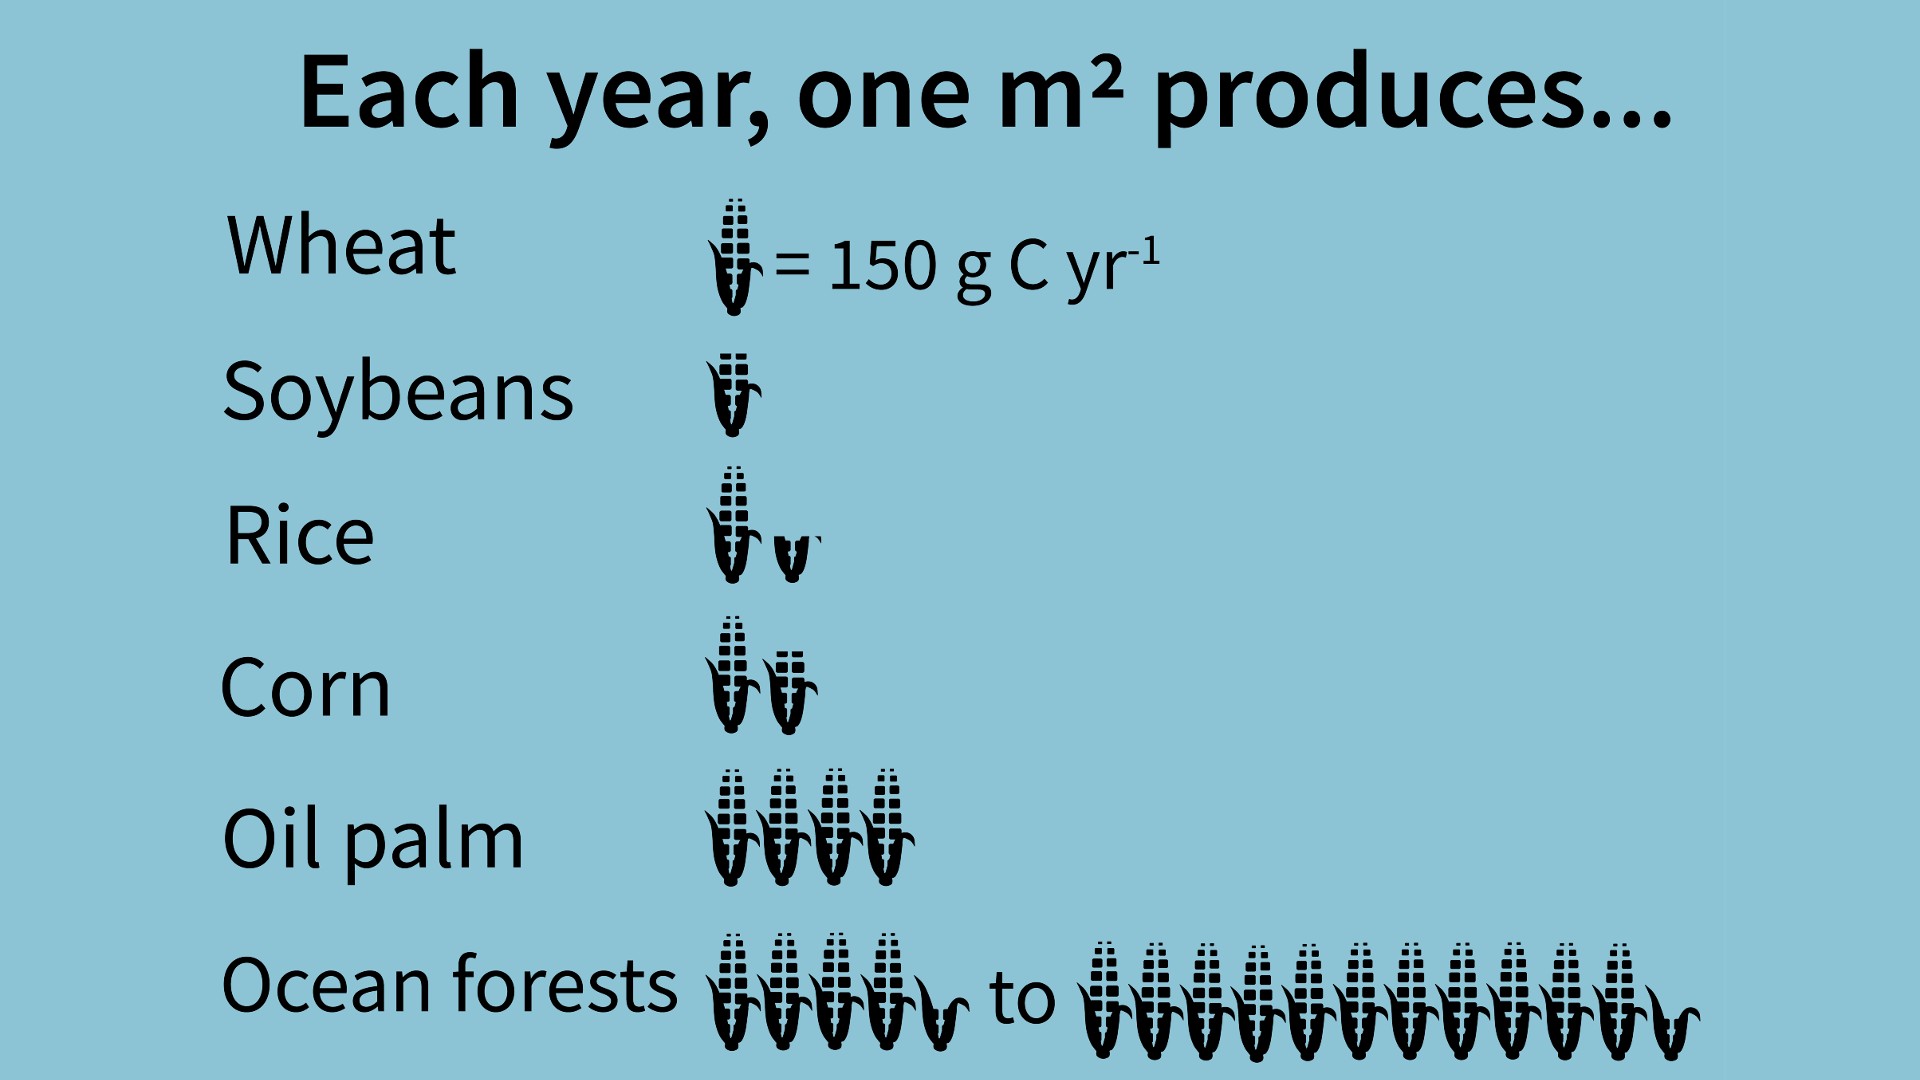 Biomass production of different crops and ocean forests (in grams of carbon per metre squared per year). Data derived from Pessarrodona et al. 2022 and the Food and Agriculture Organization.